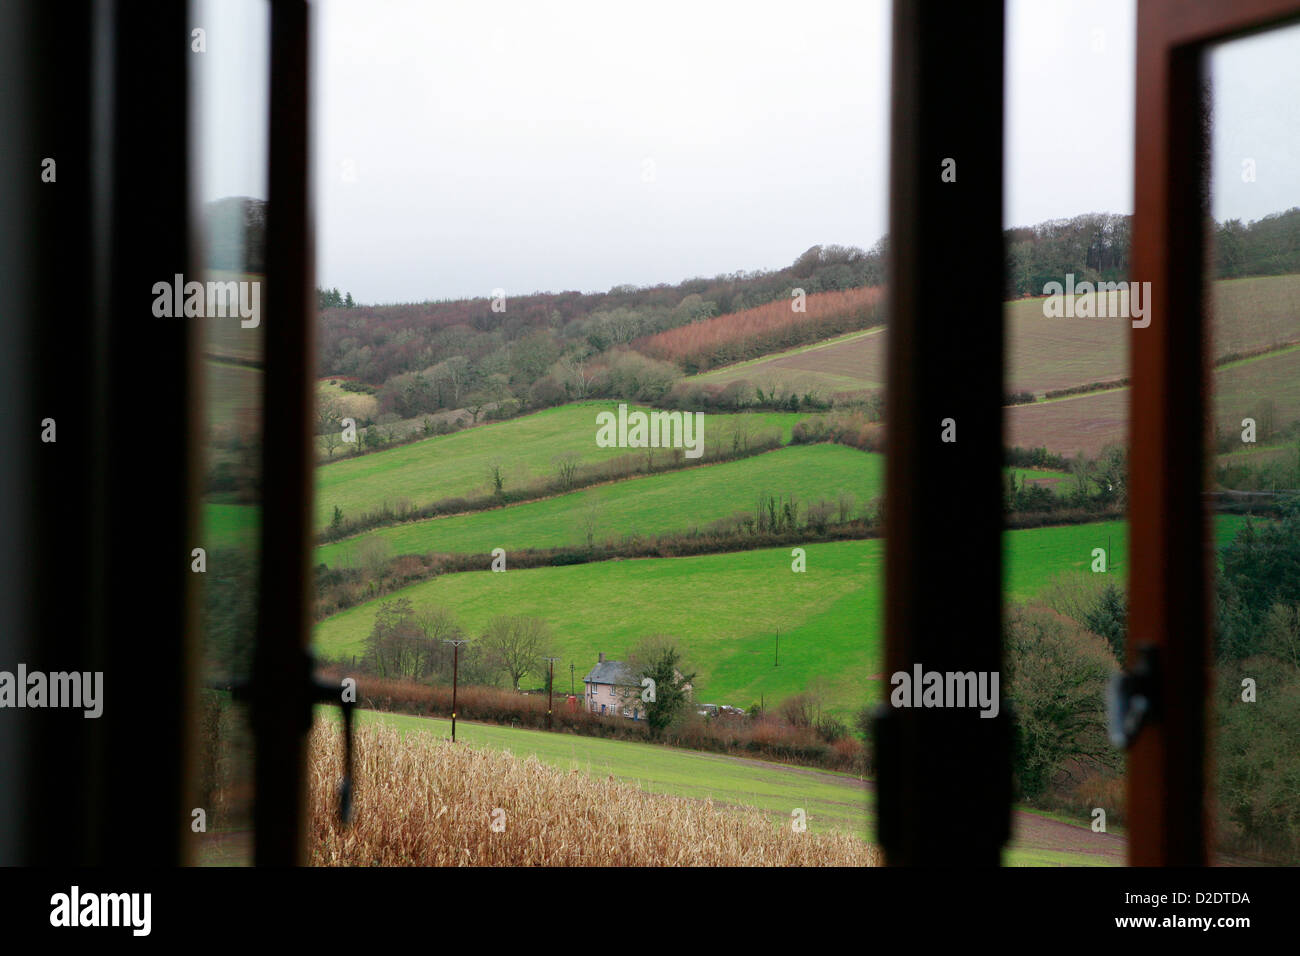 A view from an a open window of the valley countryside in Ashcombe, Devon, England. Winter landscape with only one house visible Stock Photo